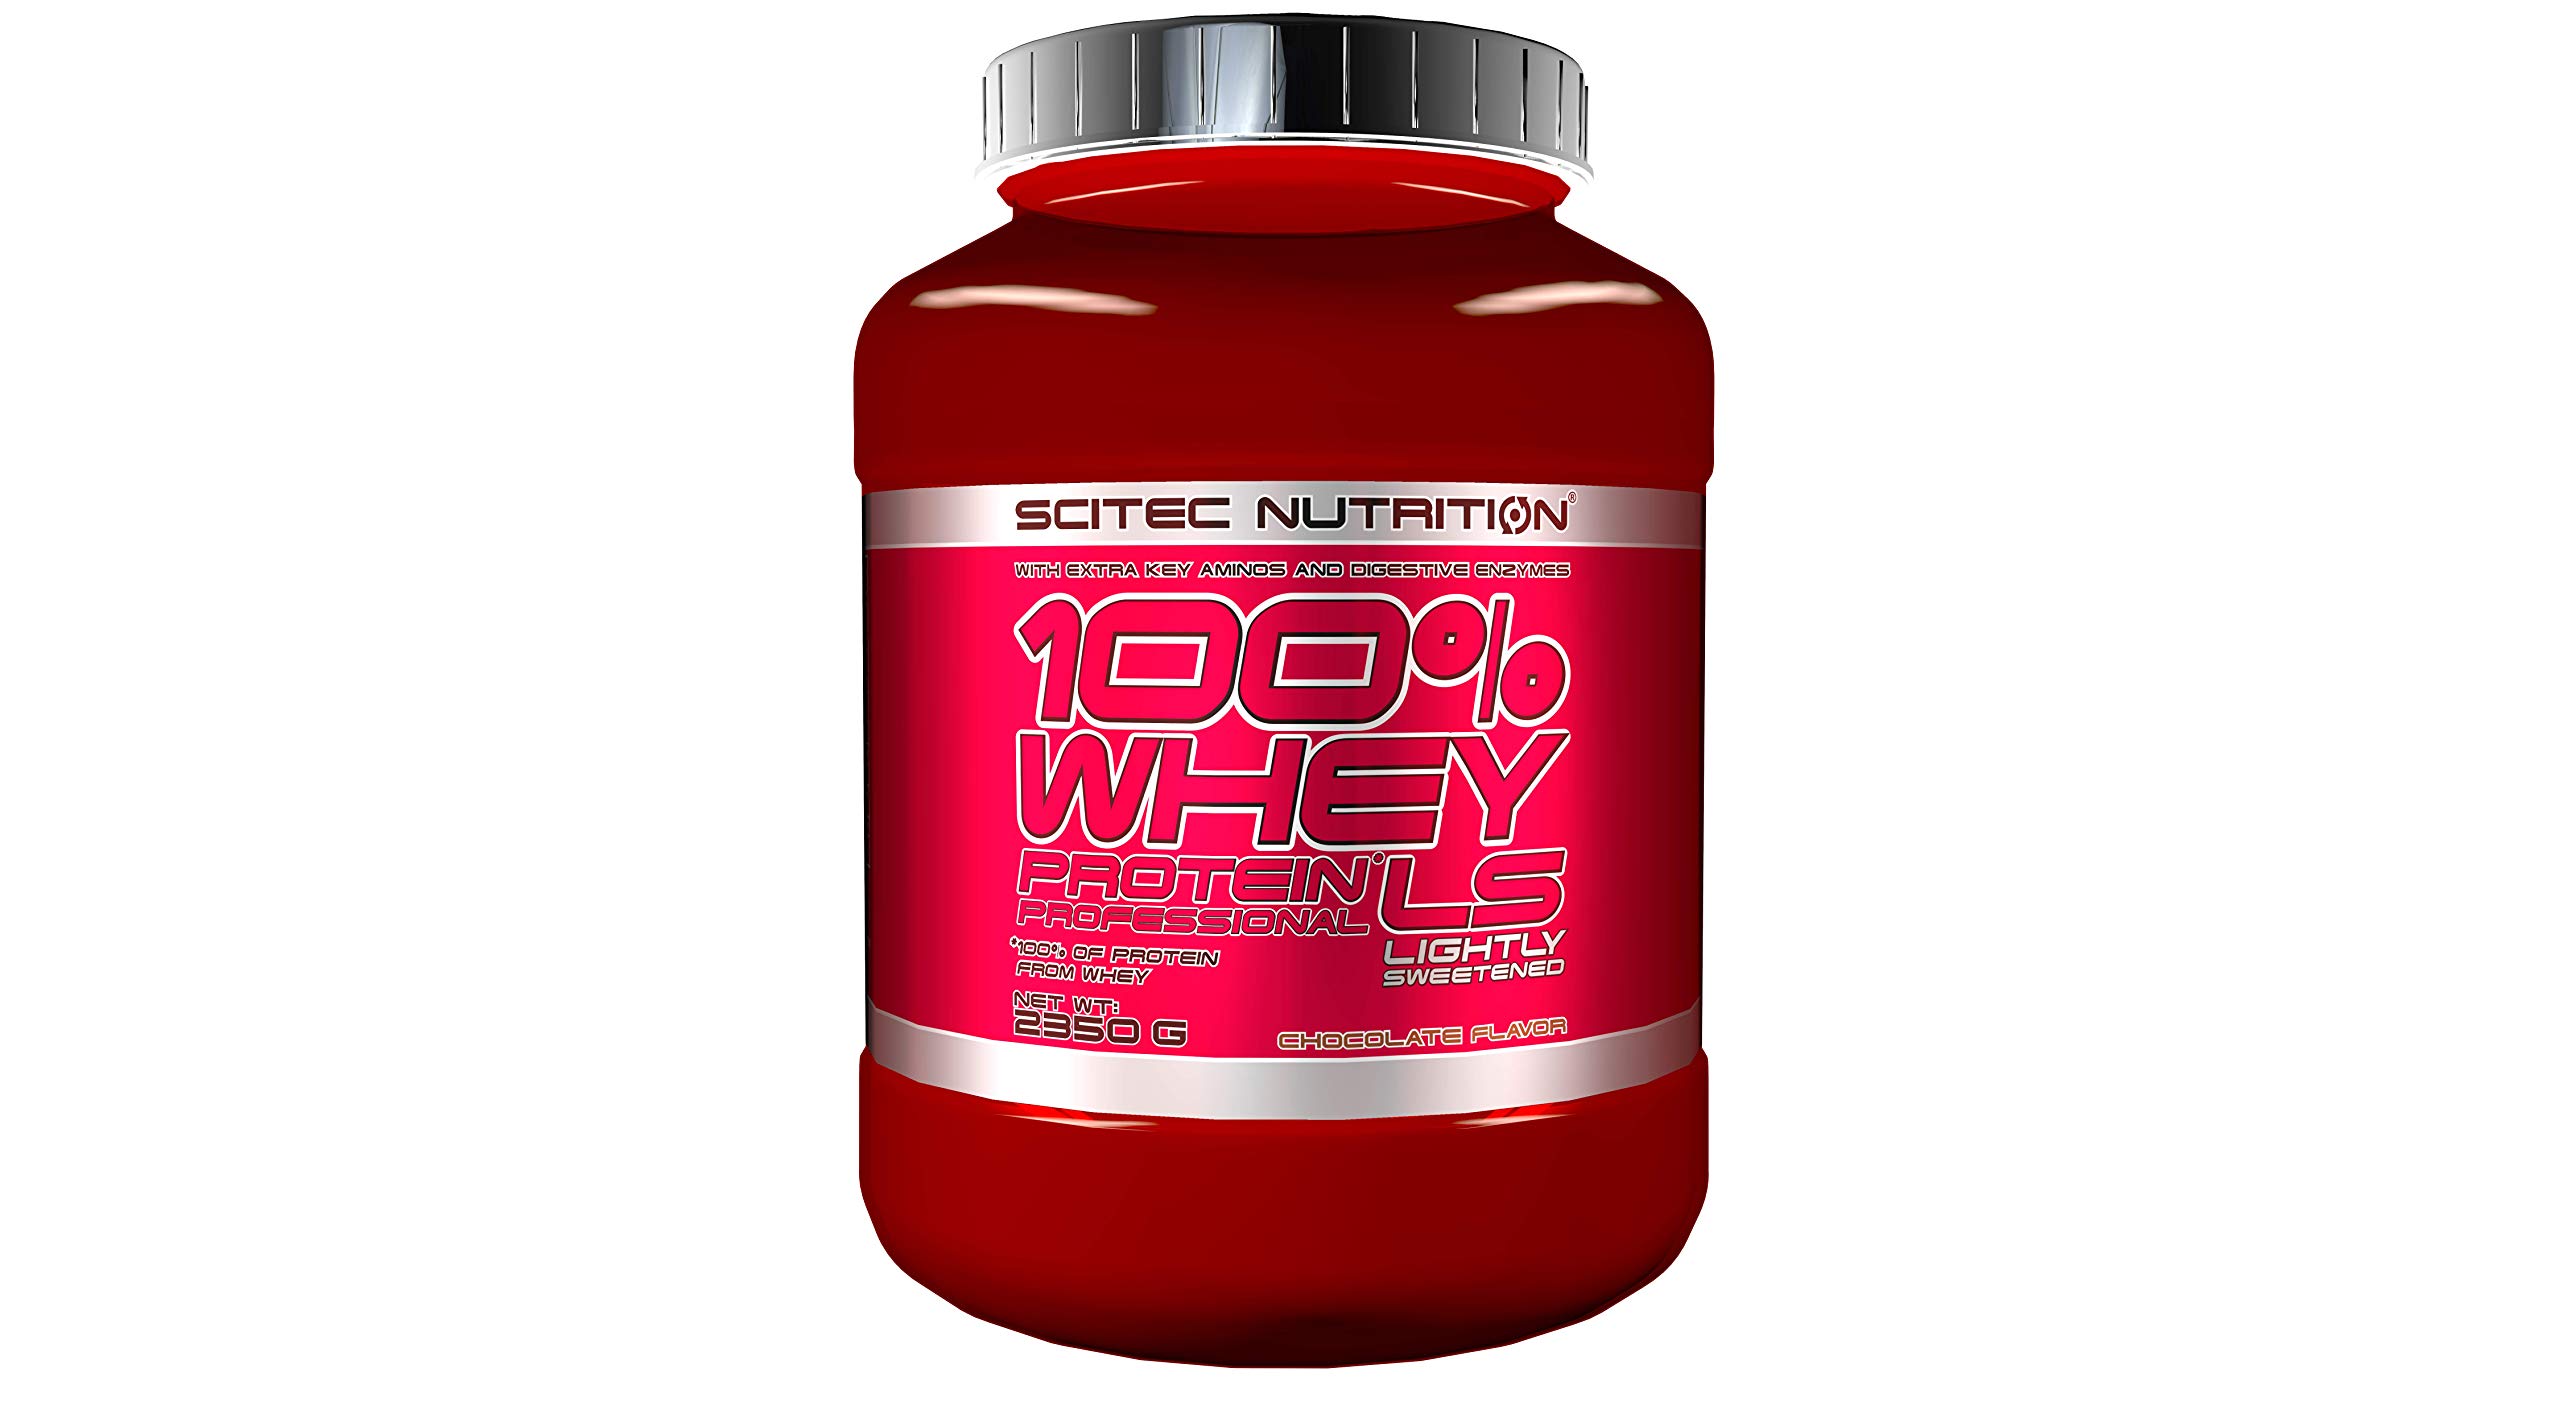 100% whey Protein Professional - 5.18 lbs - Chocolate - Scitec nutrition